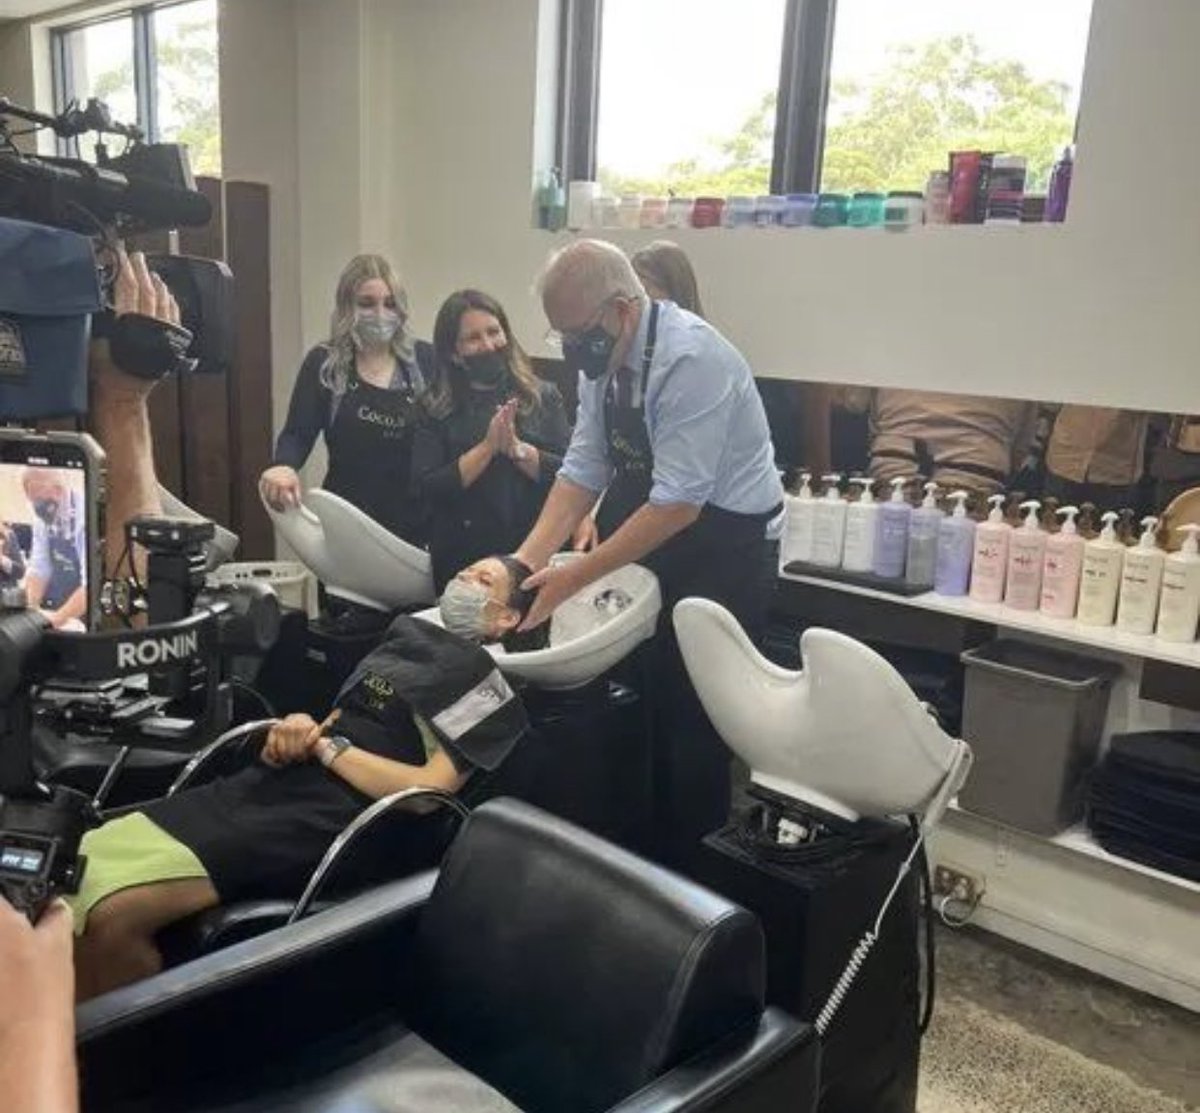 If the Prime Minister really had the urge to get a photo washing someone’s hair he could have gone to an aged care home, taken a RAT, dressed in full PPE and helped the staff wash and dress the residents. Many of these places are calling for volunteers to help out.